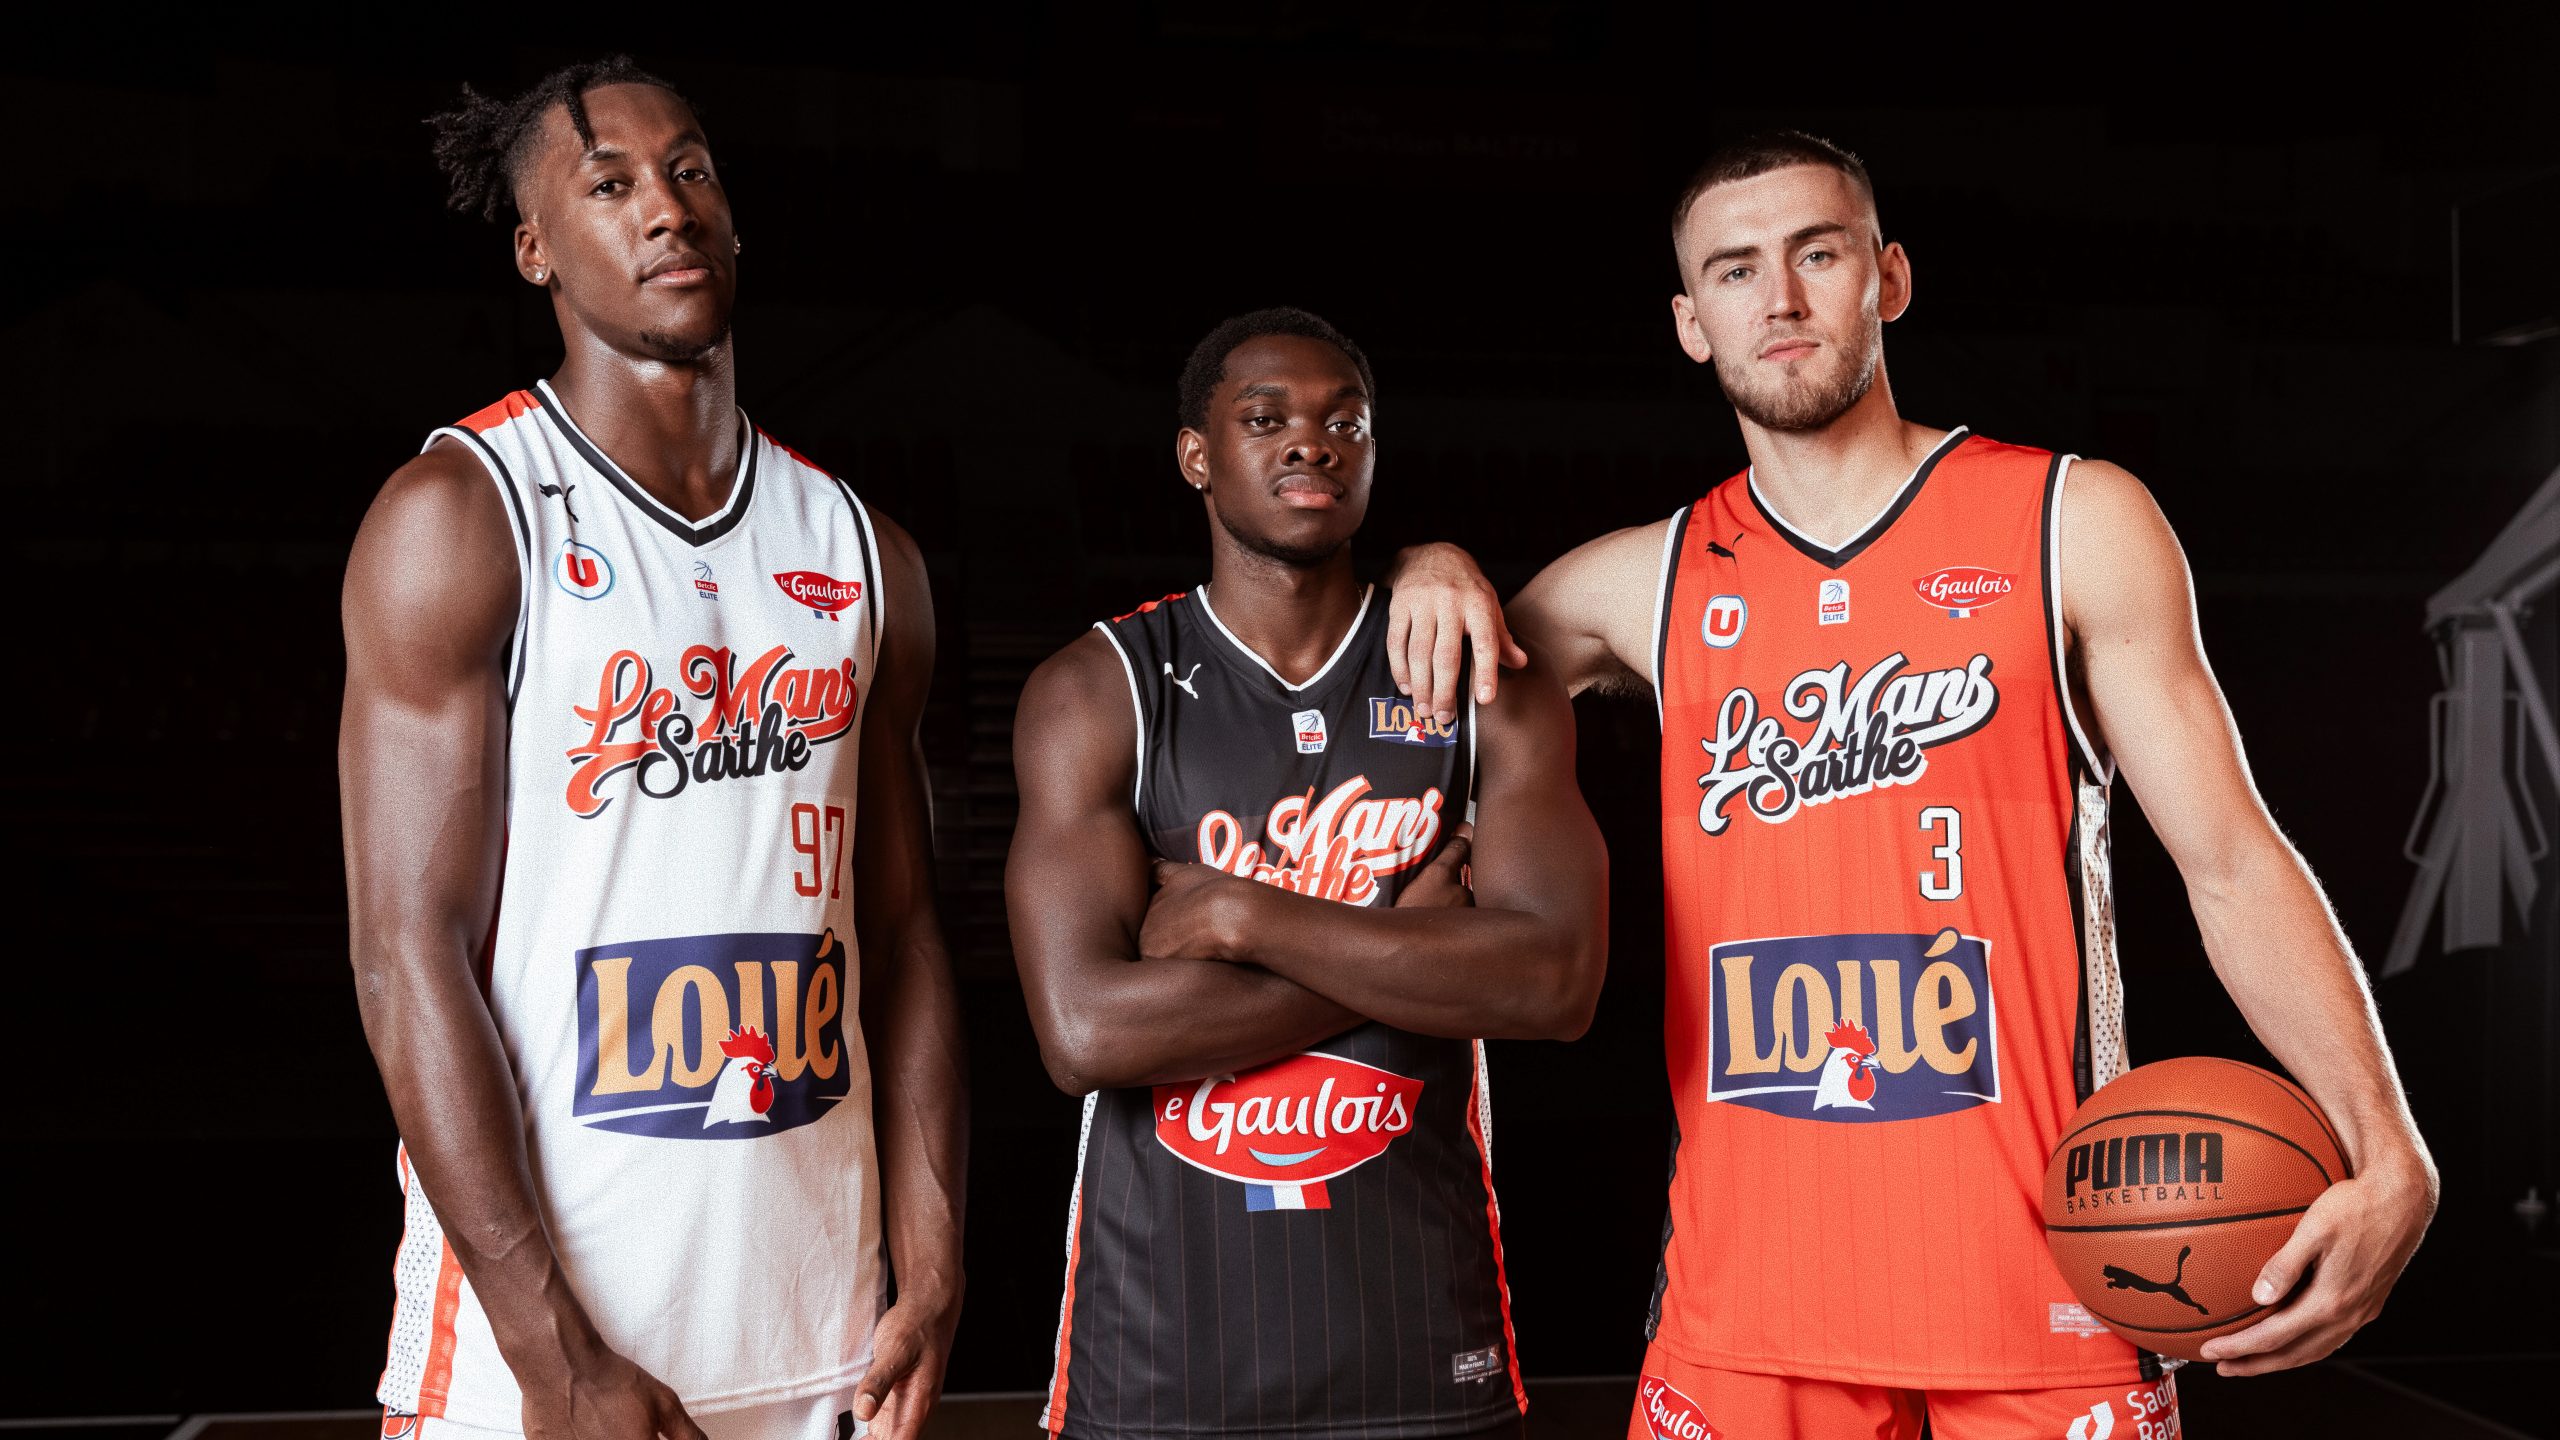 PUMA Designs Elite French Basketball Jerseys in Collaboration with